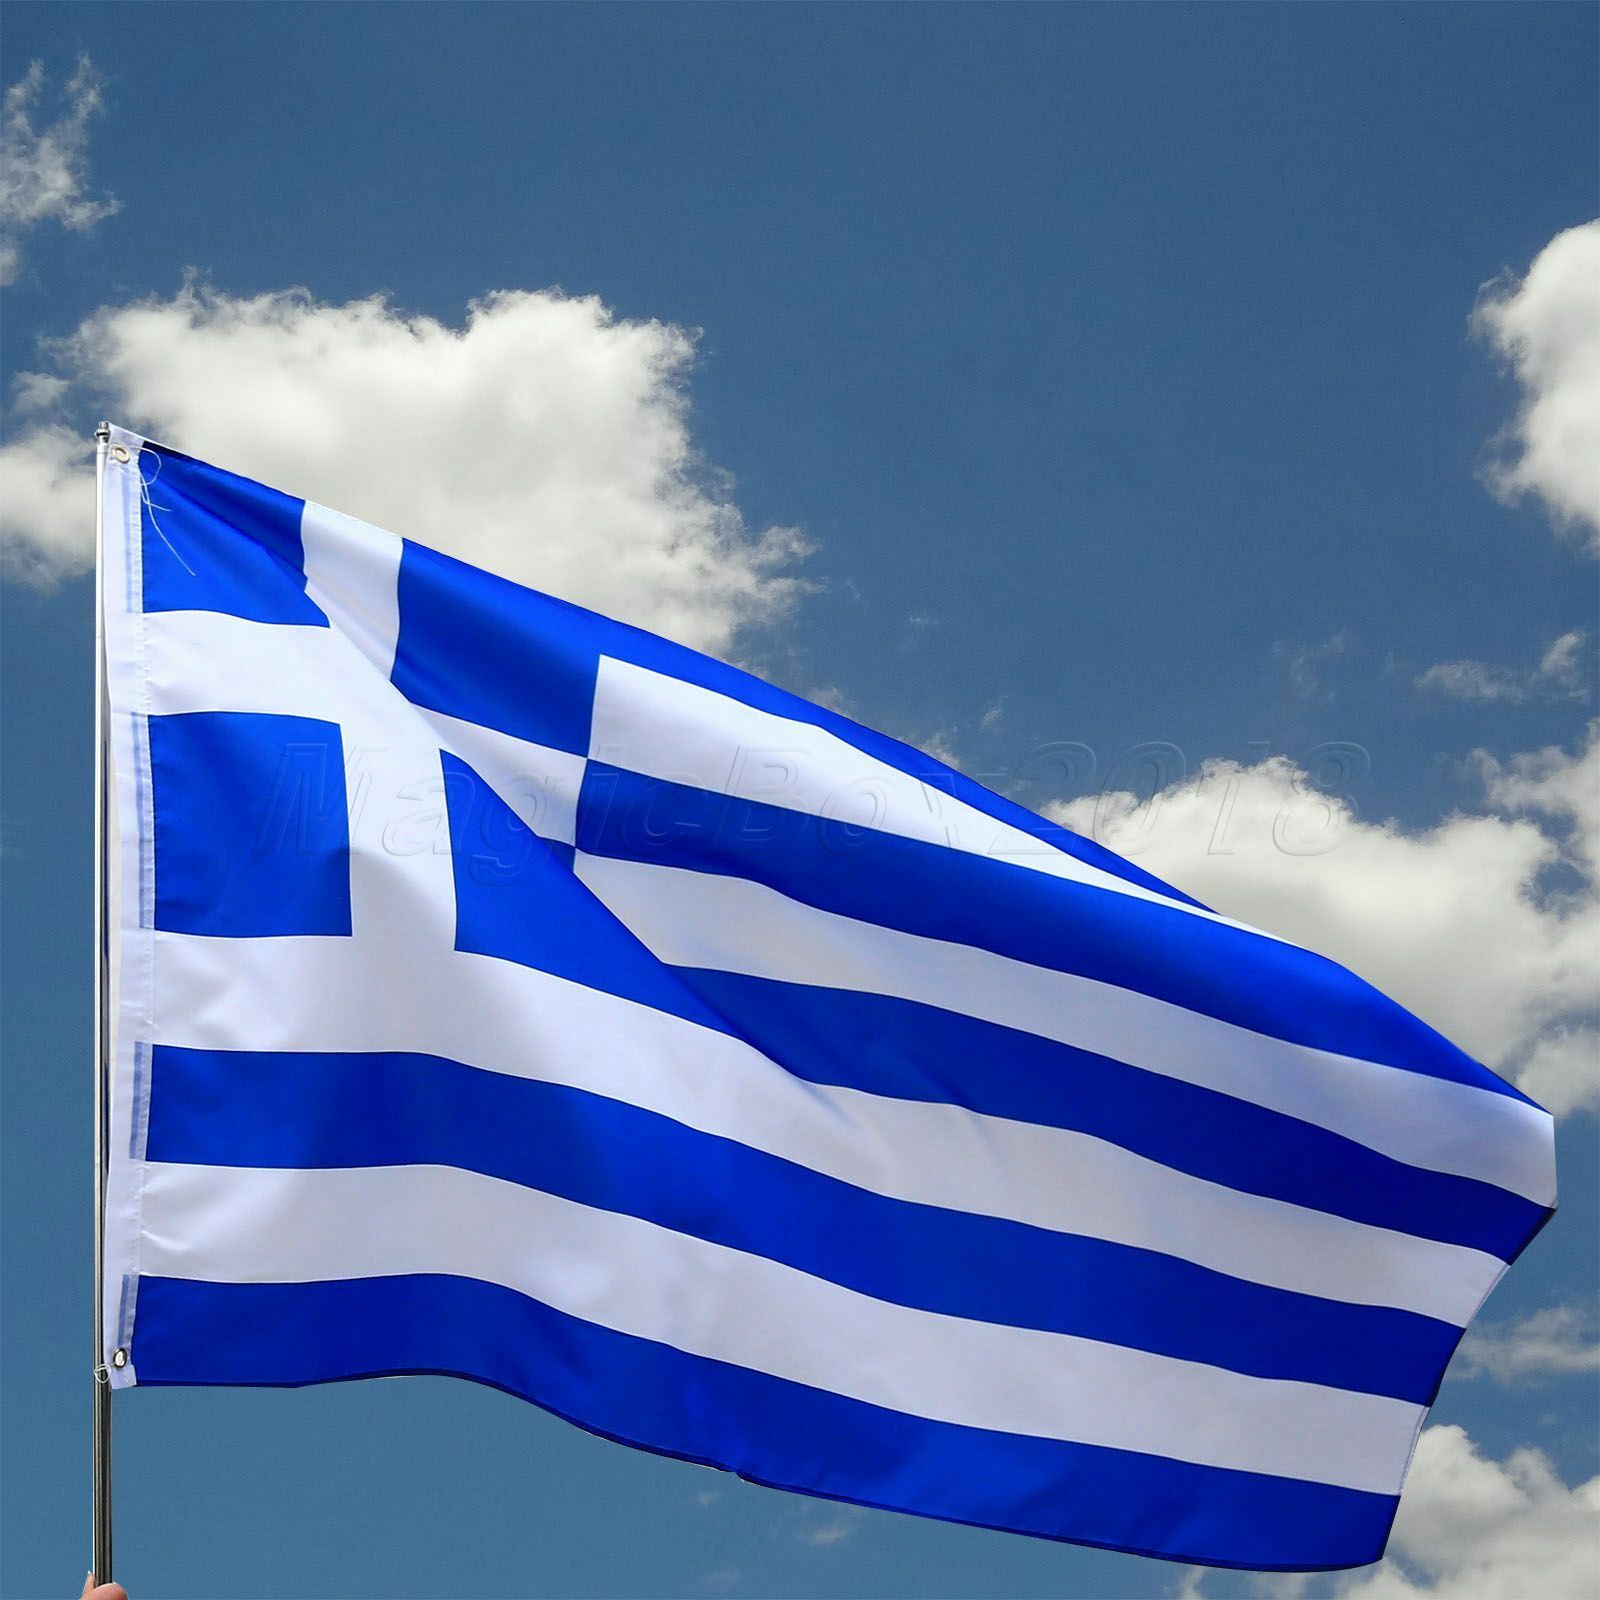 5' x 3' Large Greece Flag Greek National Flags Europe Banner ΣΗΜΑΊΑ ΤΗΣ ΕΛΛΆΔΑΣ